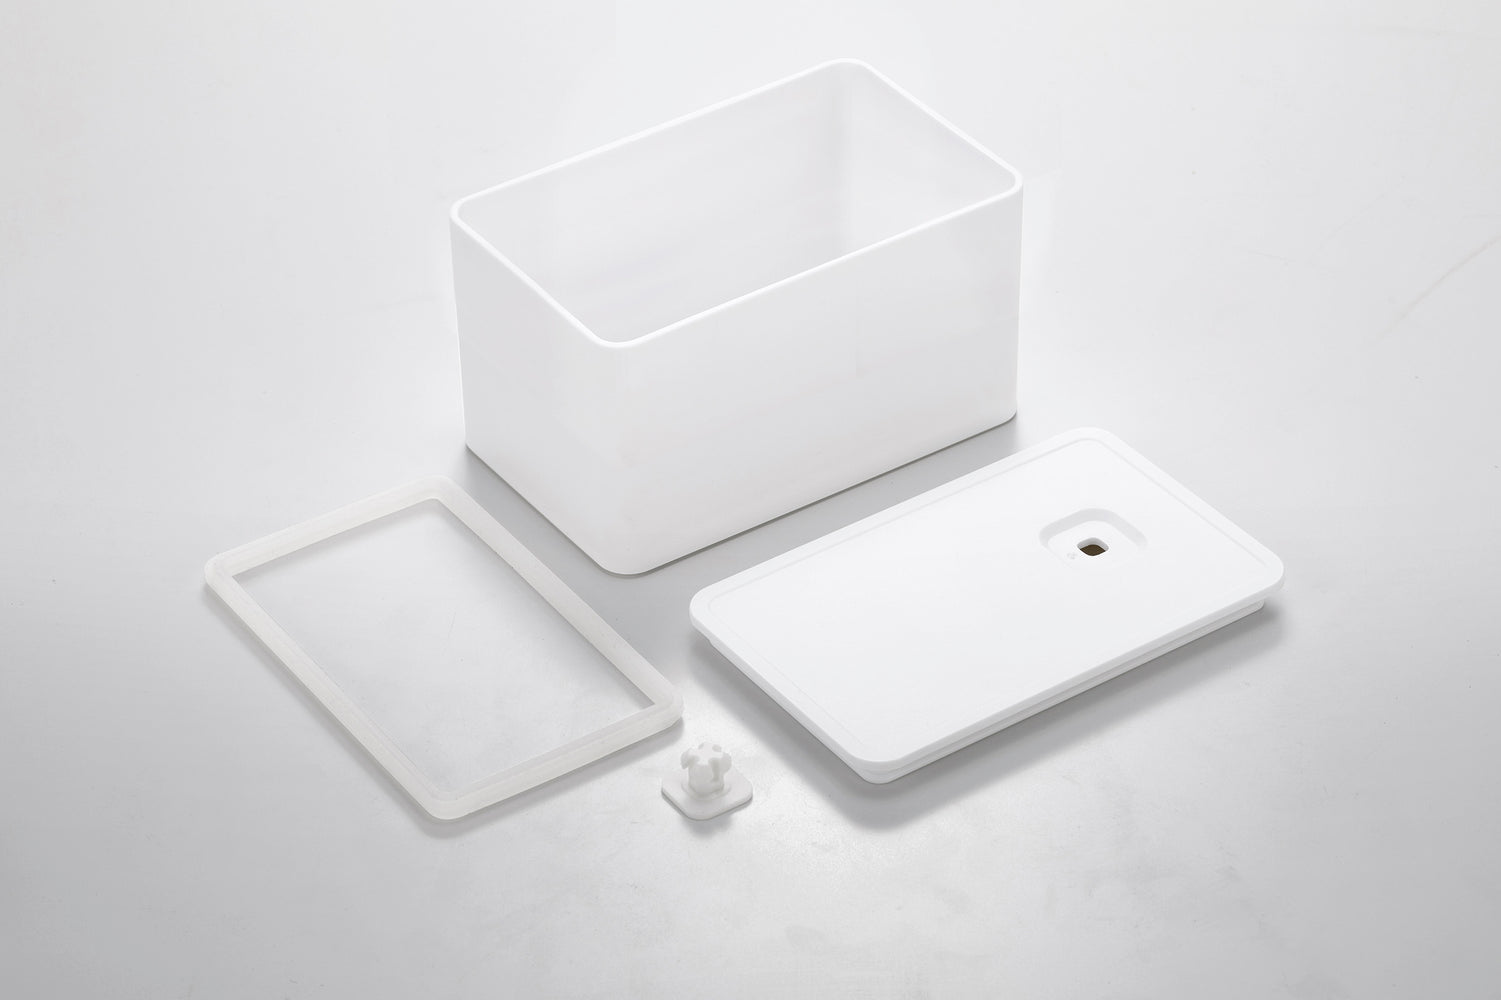 View 6 - White Vacuum-Sealing Butter Dish disassembled on white background by Yamazaki Home.